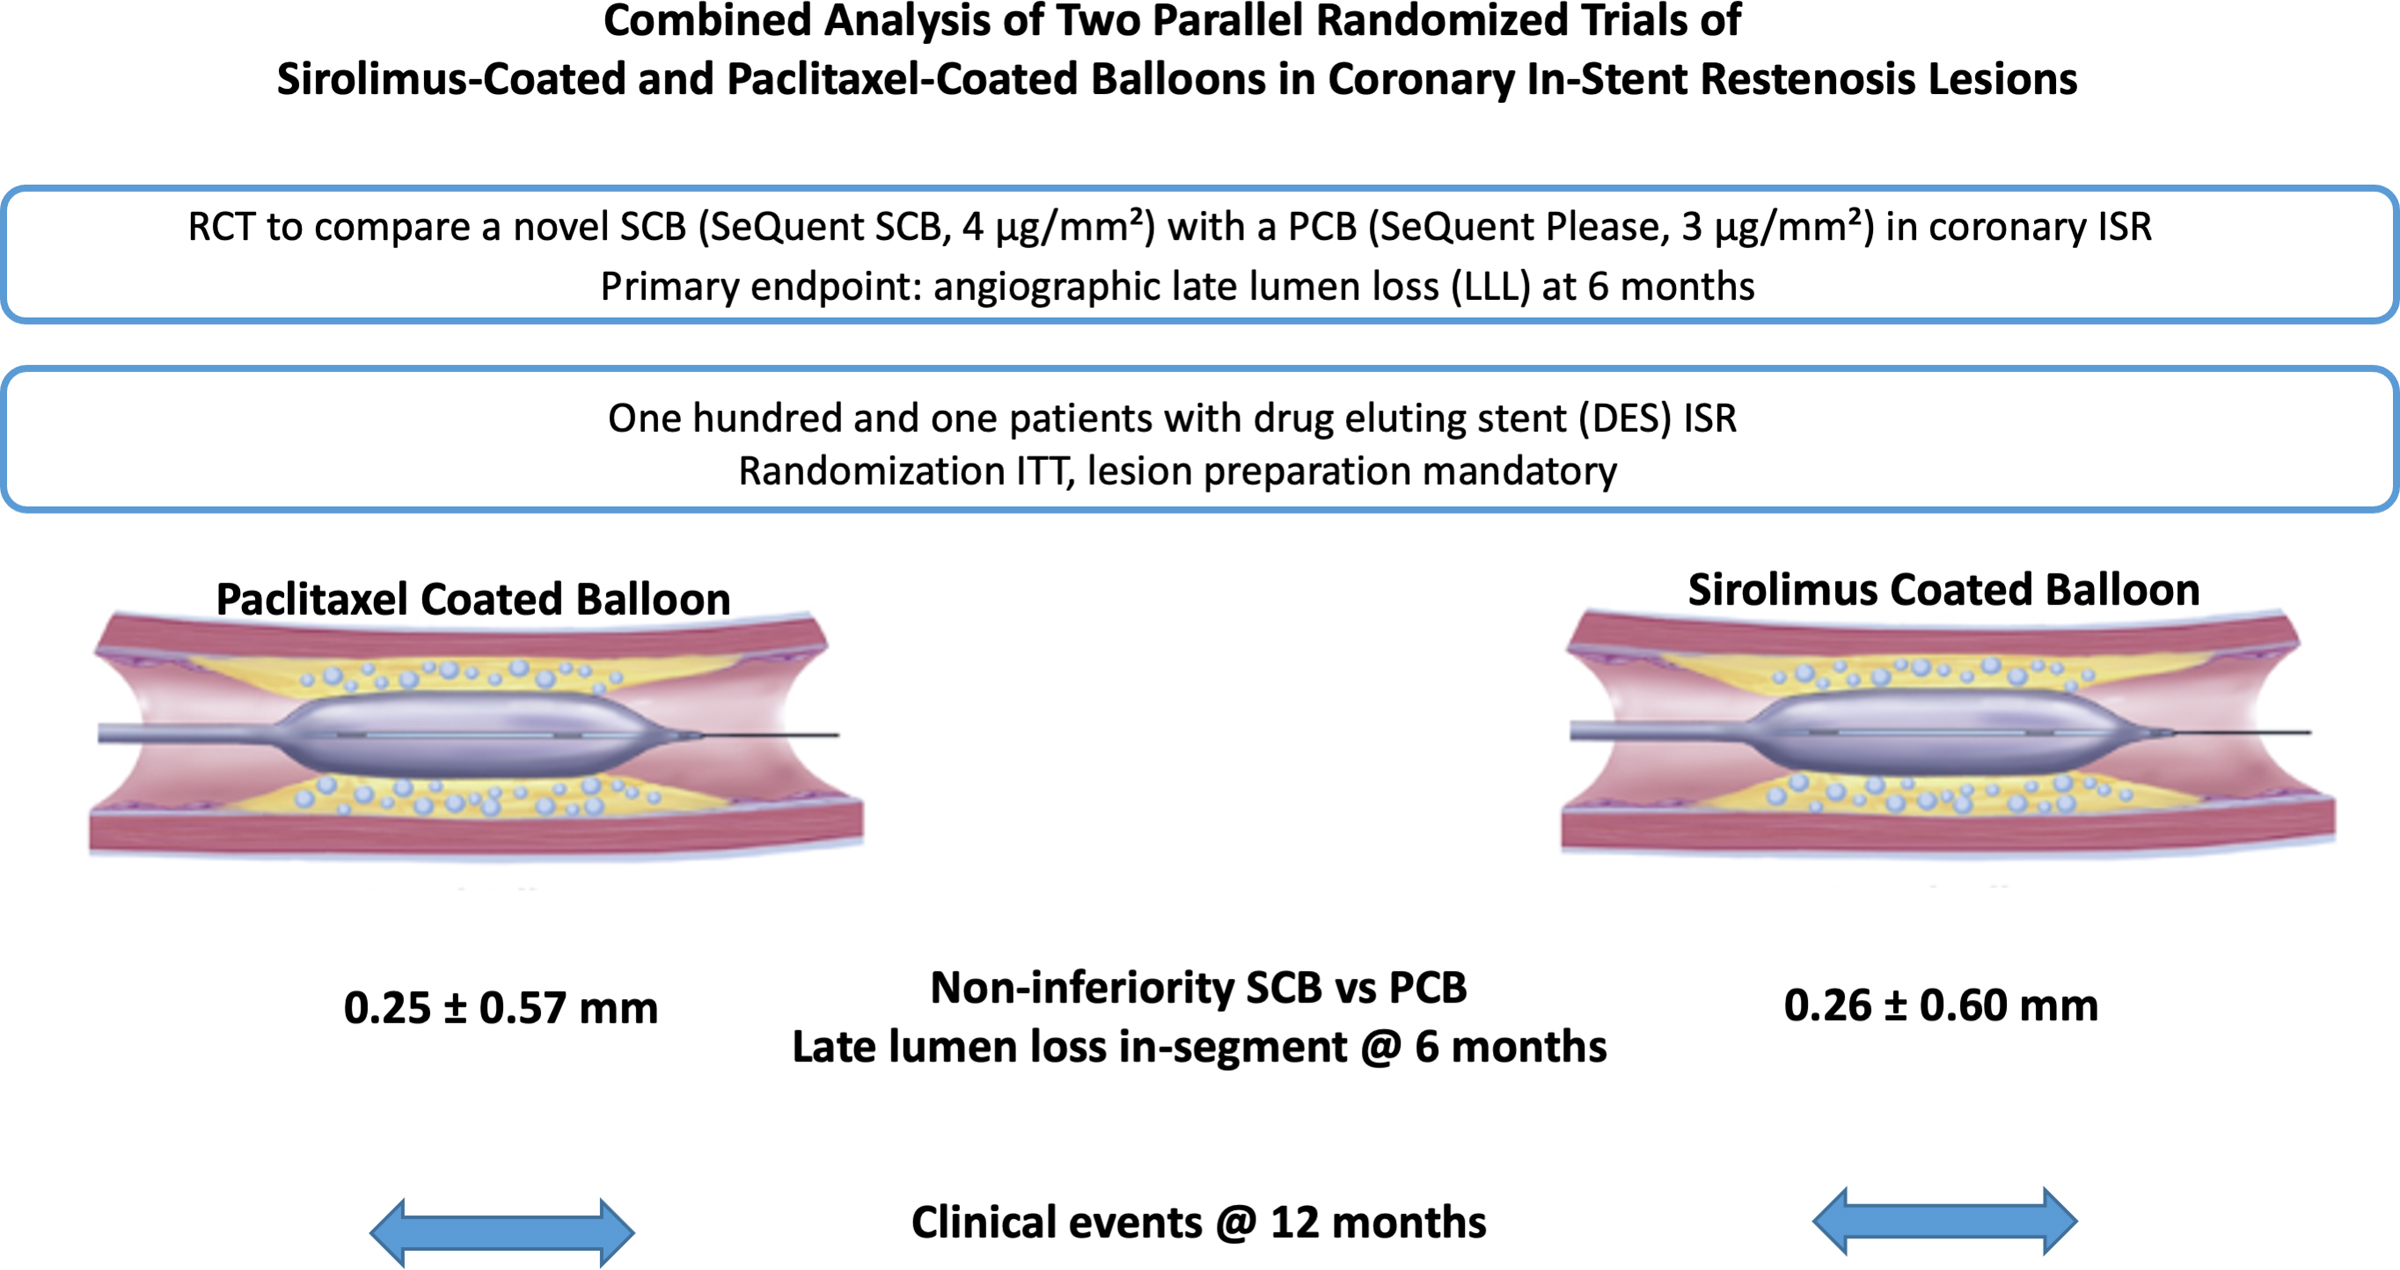 Combined Analysis of Two Parallel Randomized Trials of Sirolimus-Coated and Paclitaxel-Coated Balloons in Coronary In-Stent Restenosis Lesions